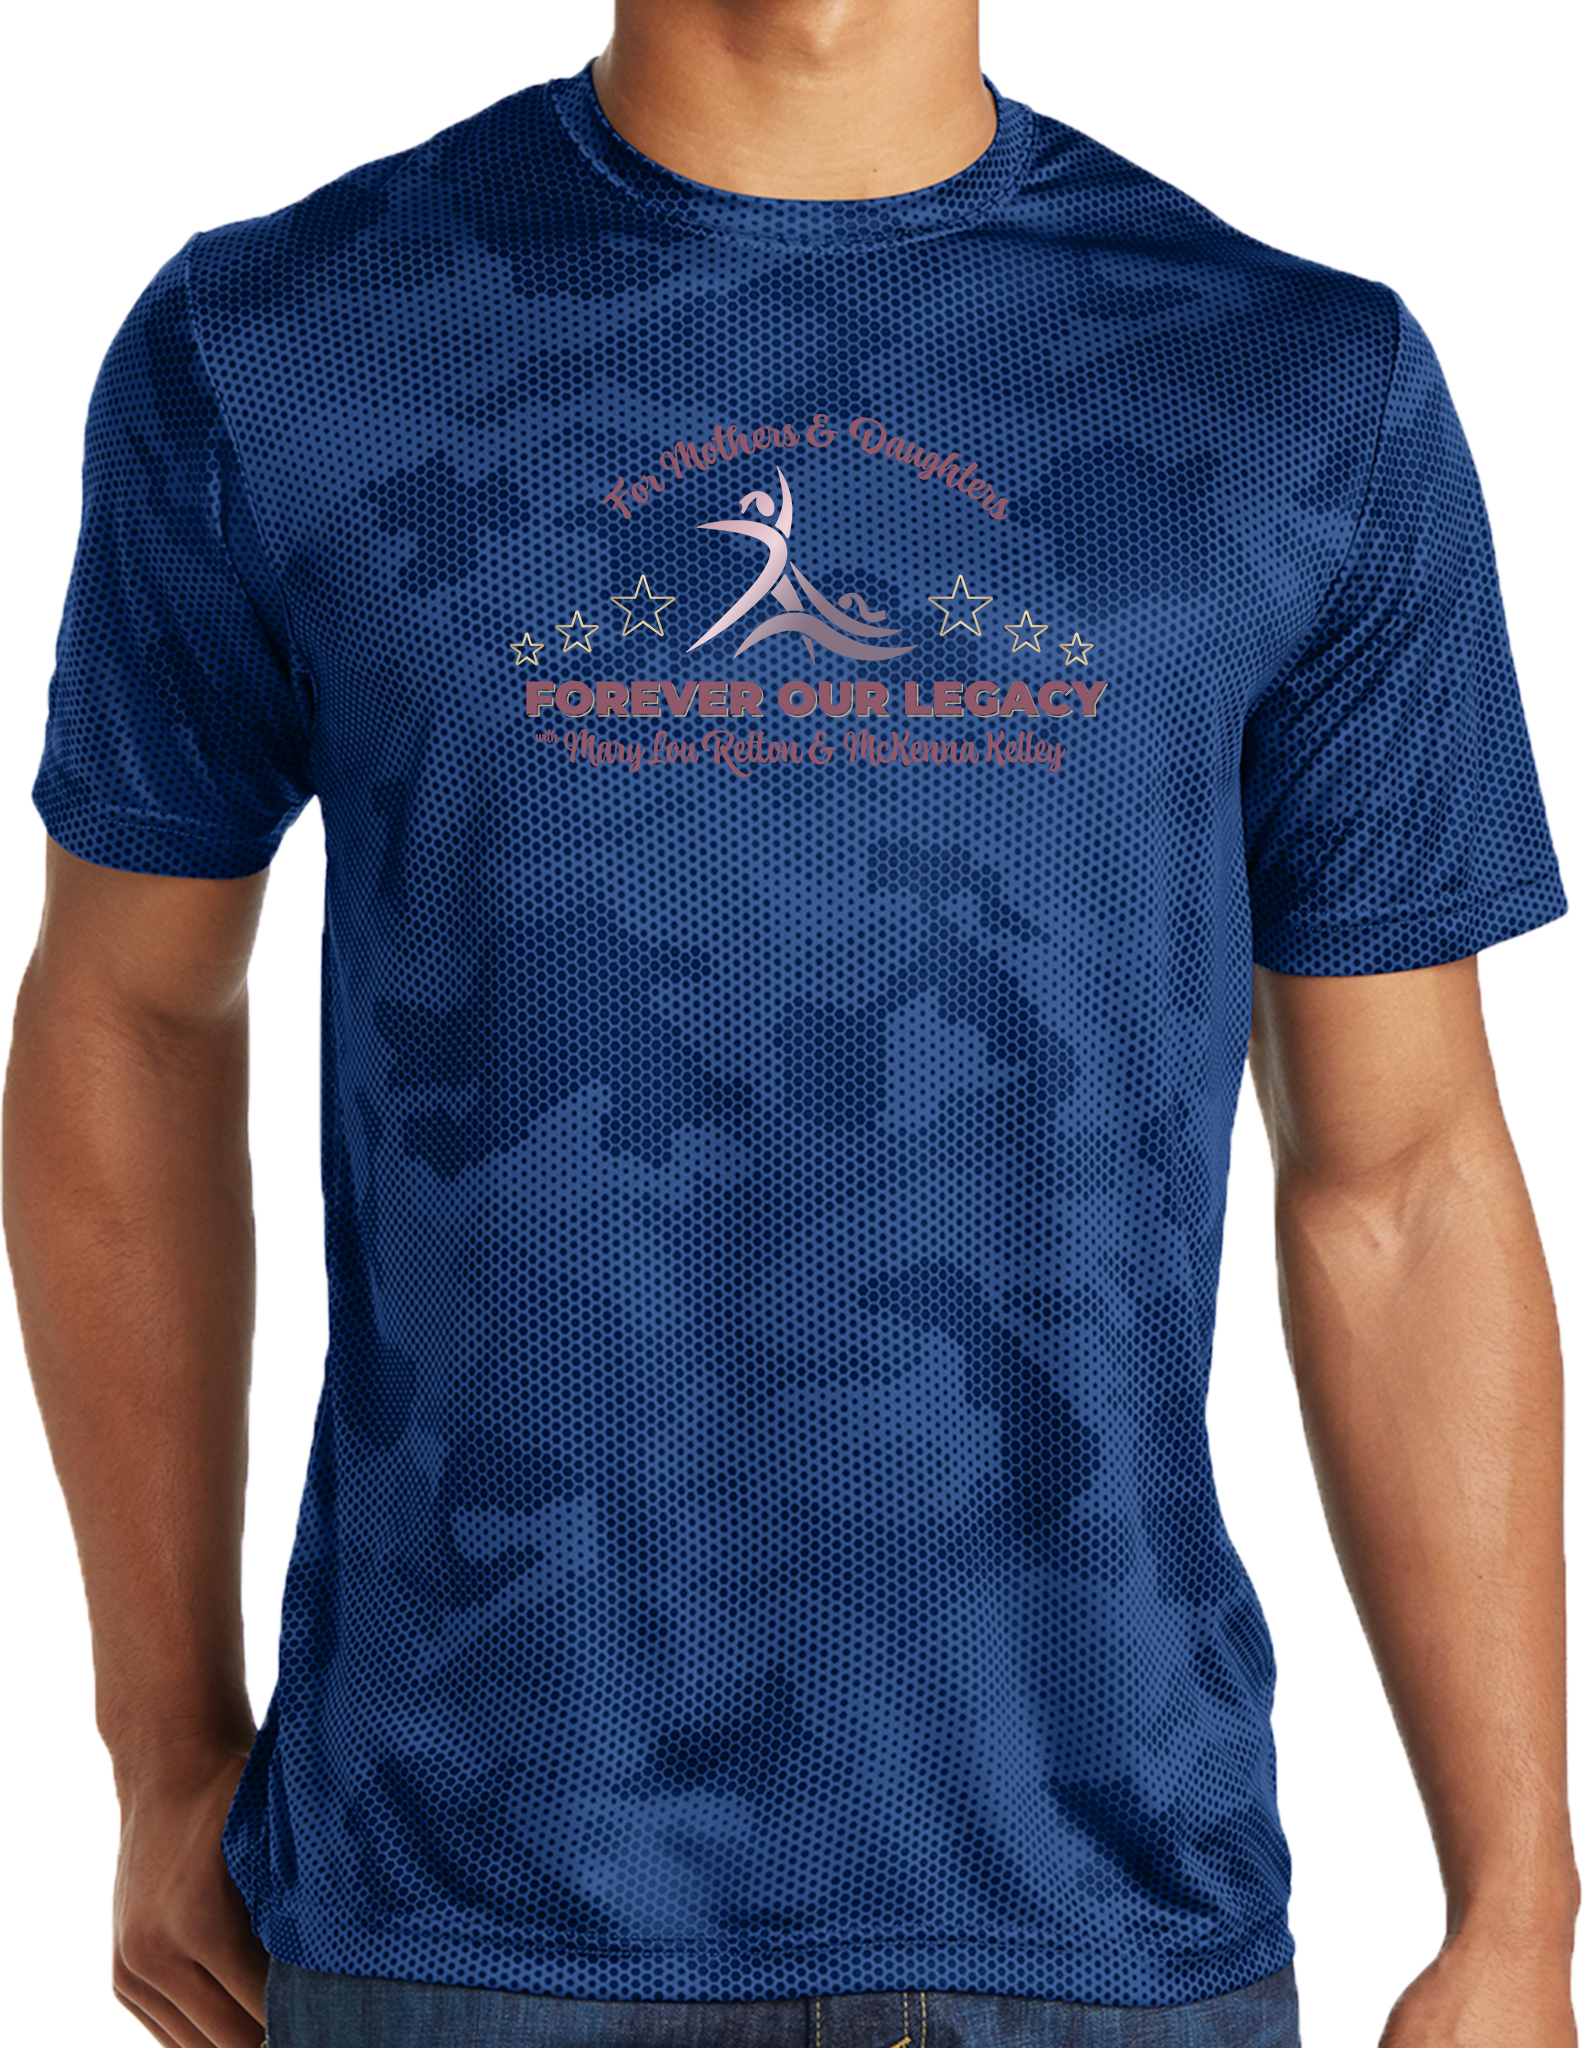 PERFORMANCE SHIRTS - 2023 For Mothers & Daughters Forever Our Legacy with Mary Lou Retton and Mckenna Kelley